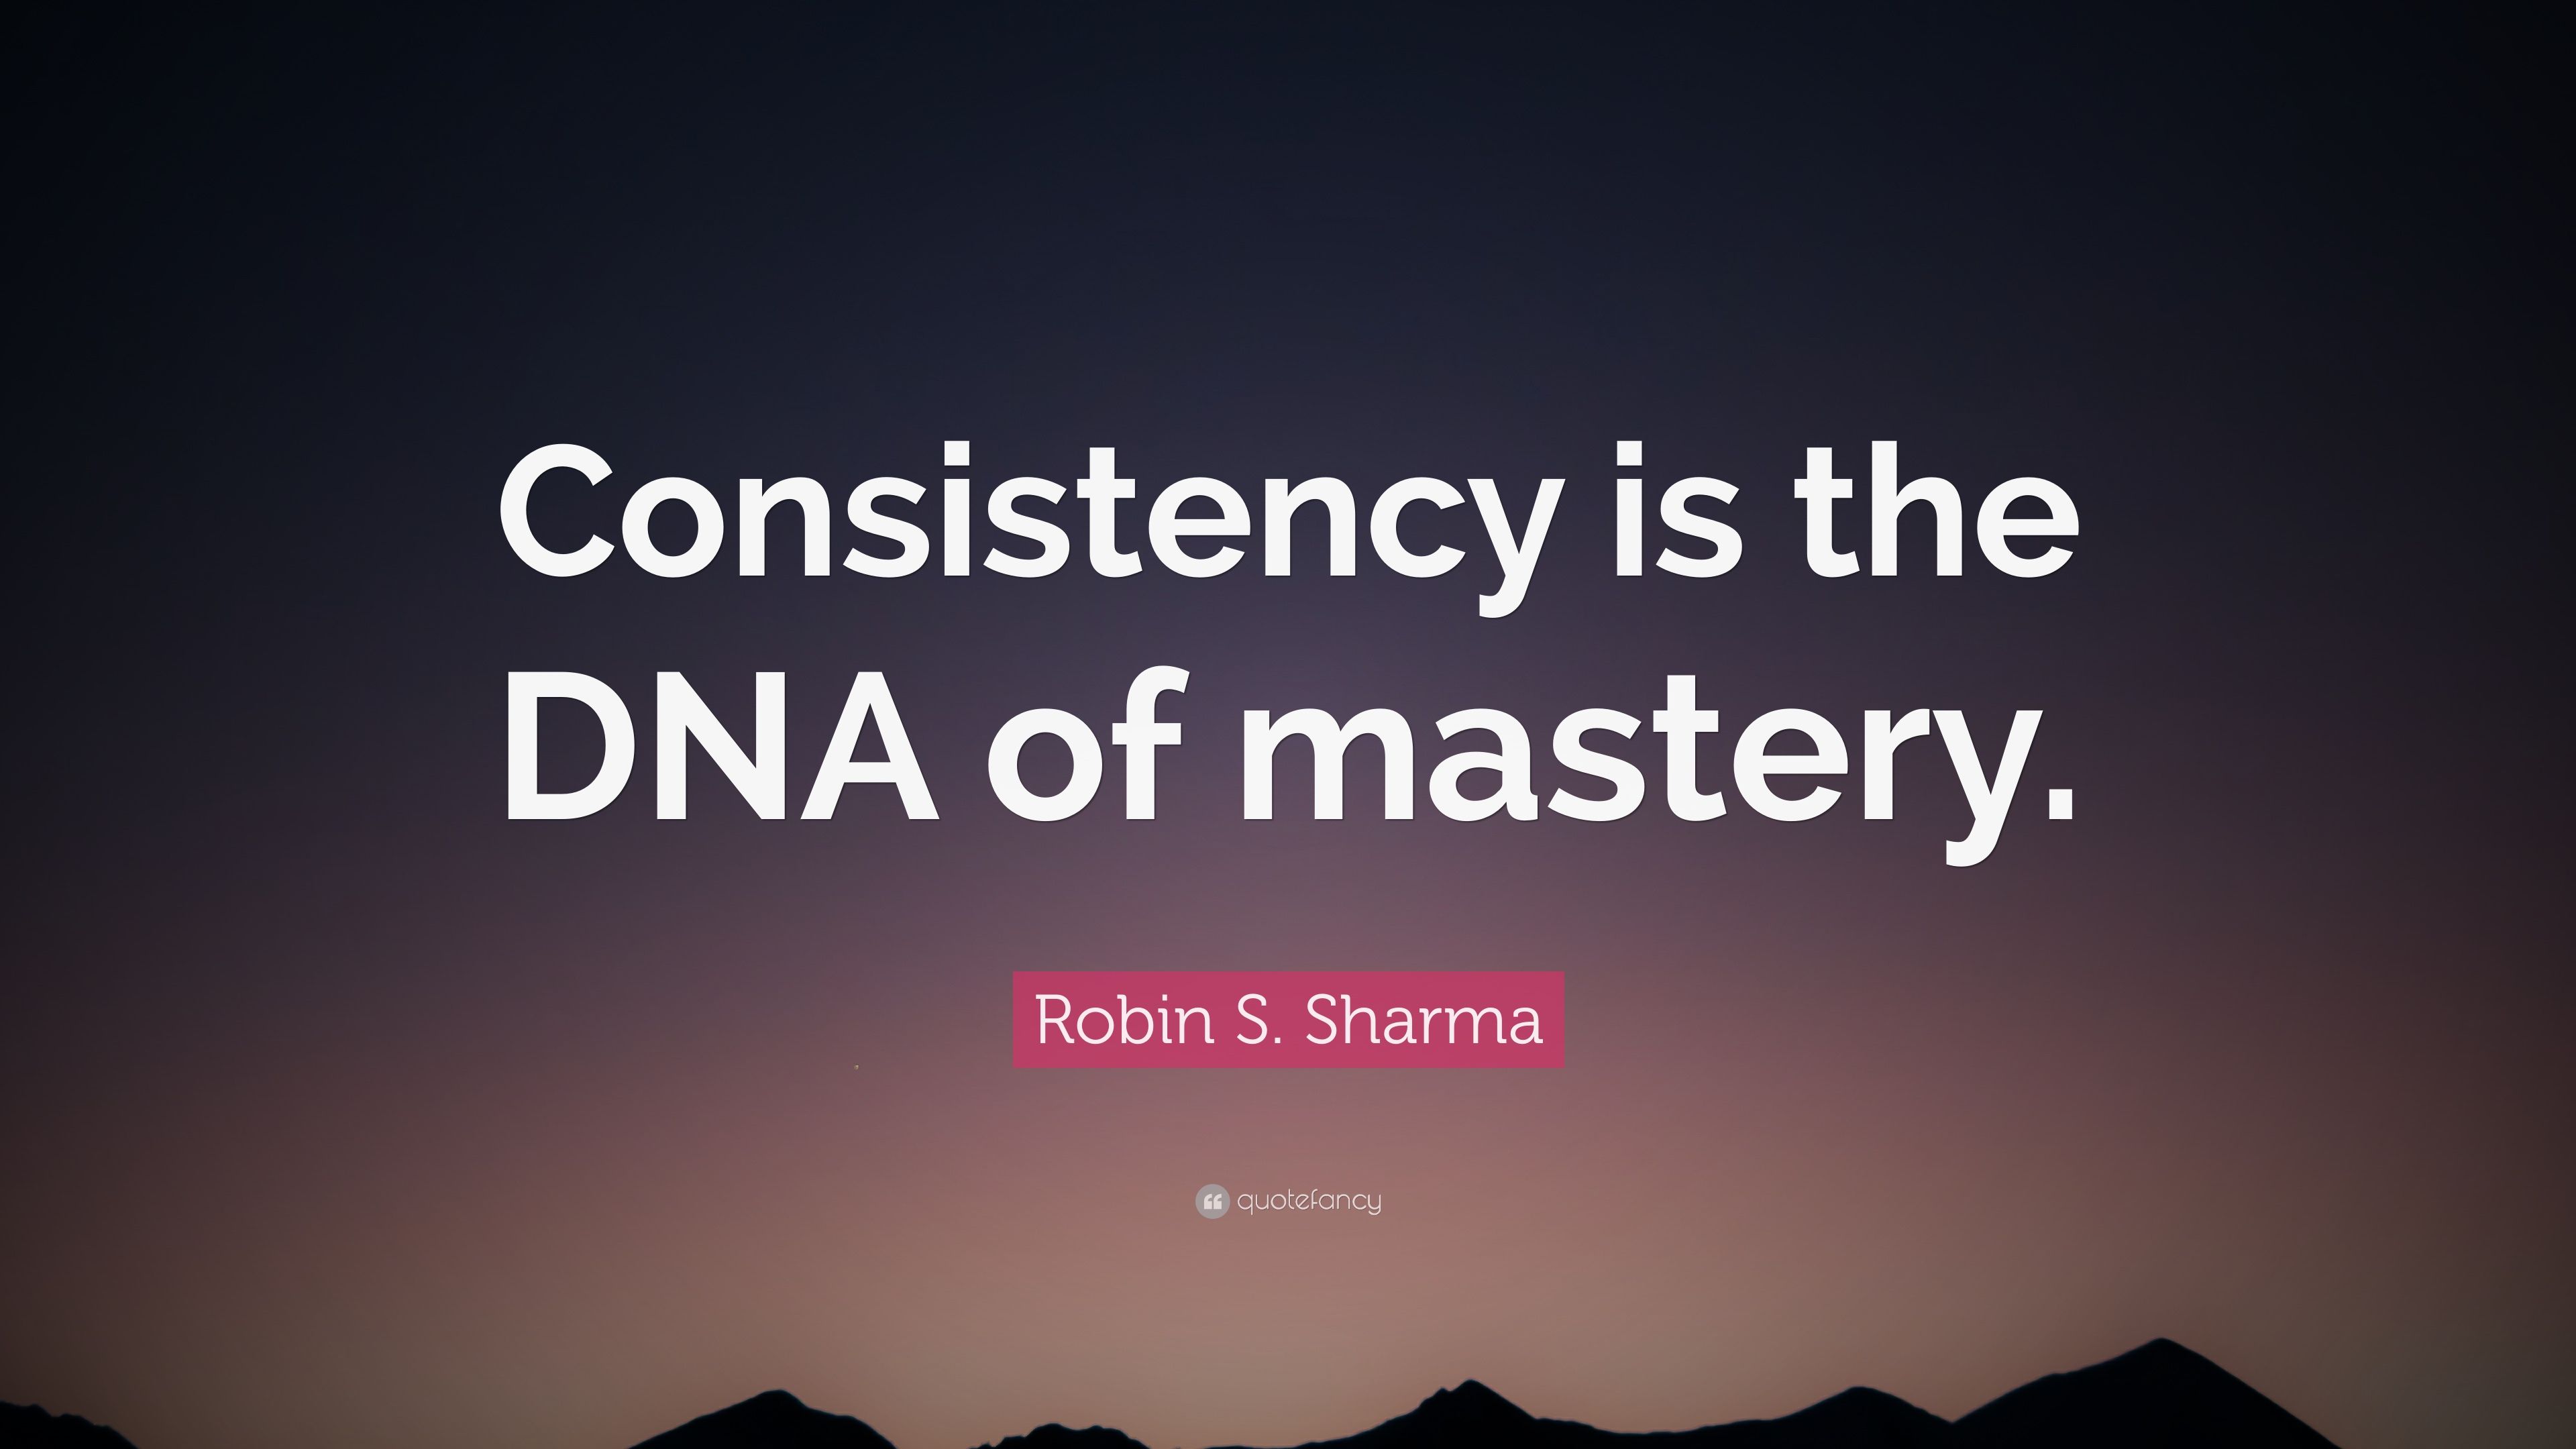 Robin S. Sharma Quote: “Consistency is the DNA of mastery.” (12 wallpaper)